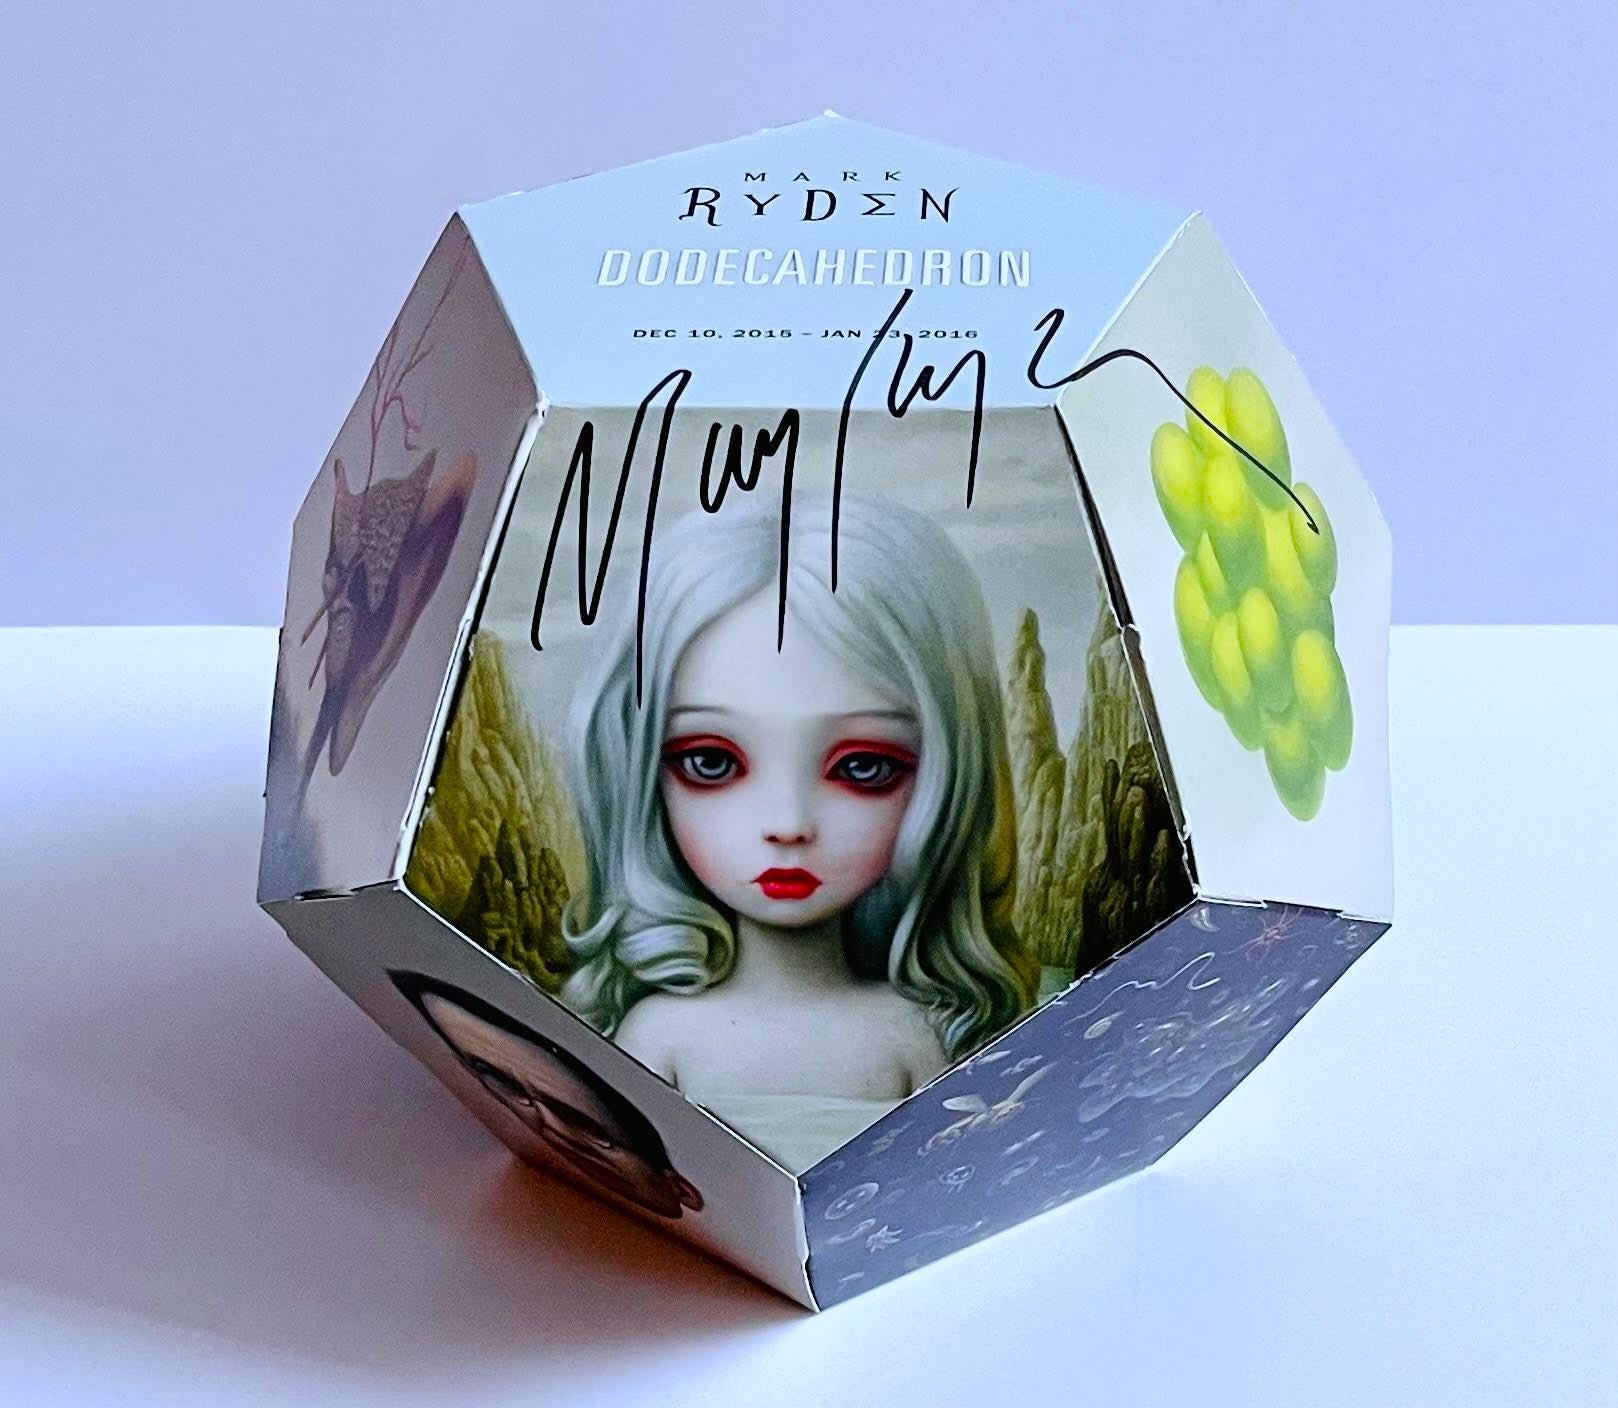 Mark Ryden
2 part invitation forming a 3-D Dodecahedron (hand signed by Mark Ryden), 2016
Offset lithograph invitation 
Hand signed by Mark Ryden
6 1/2 in diameter

Ingeniously designed 2-parts which form a 3-D paper sculpture in the shape of a